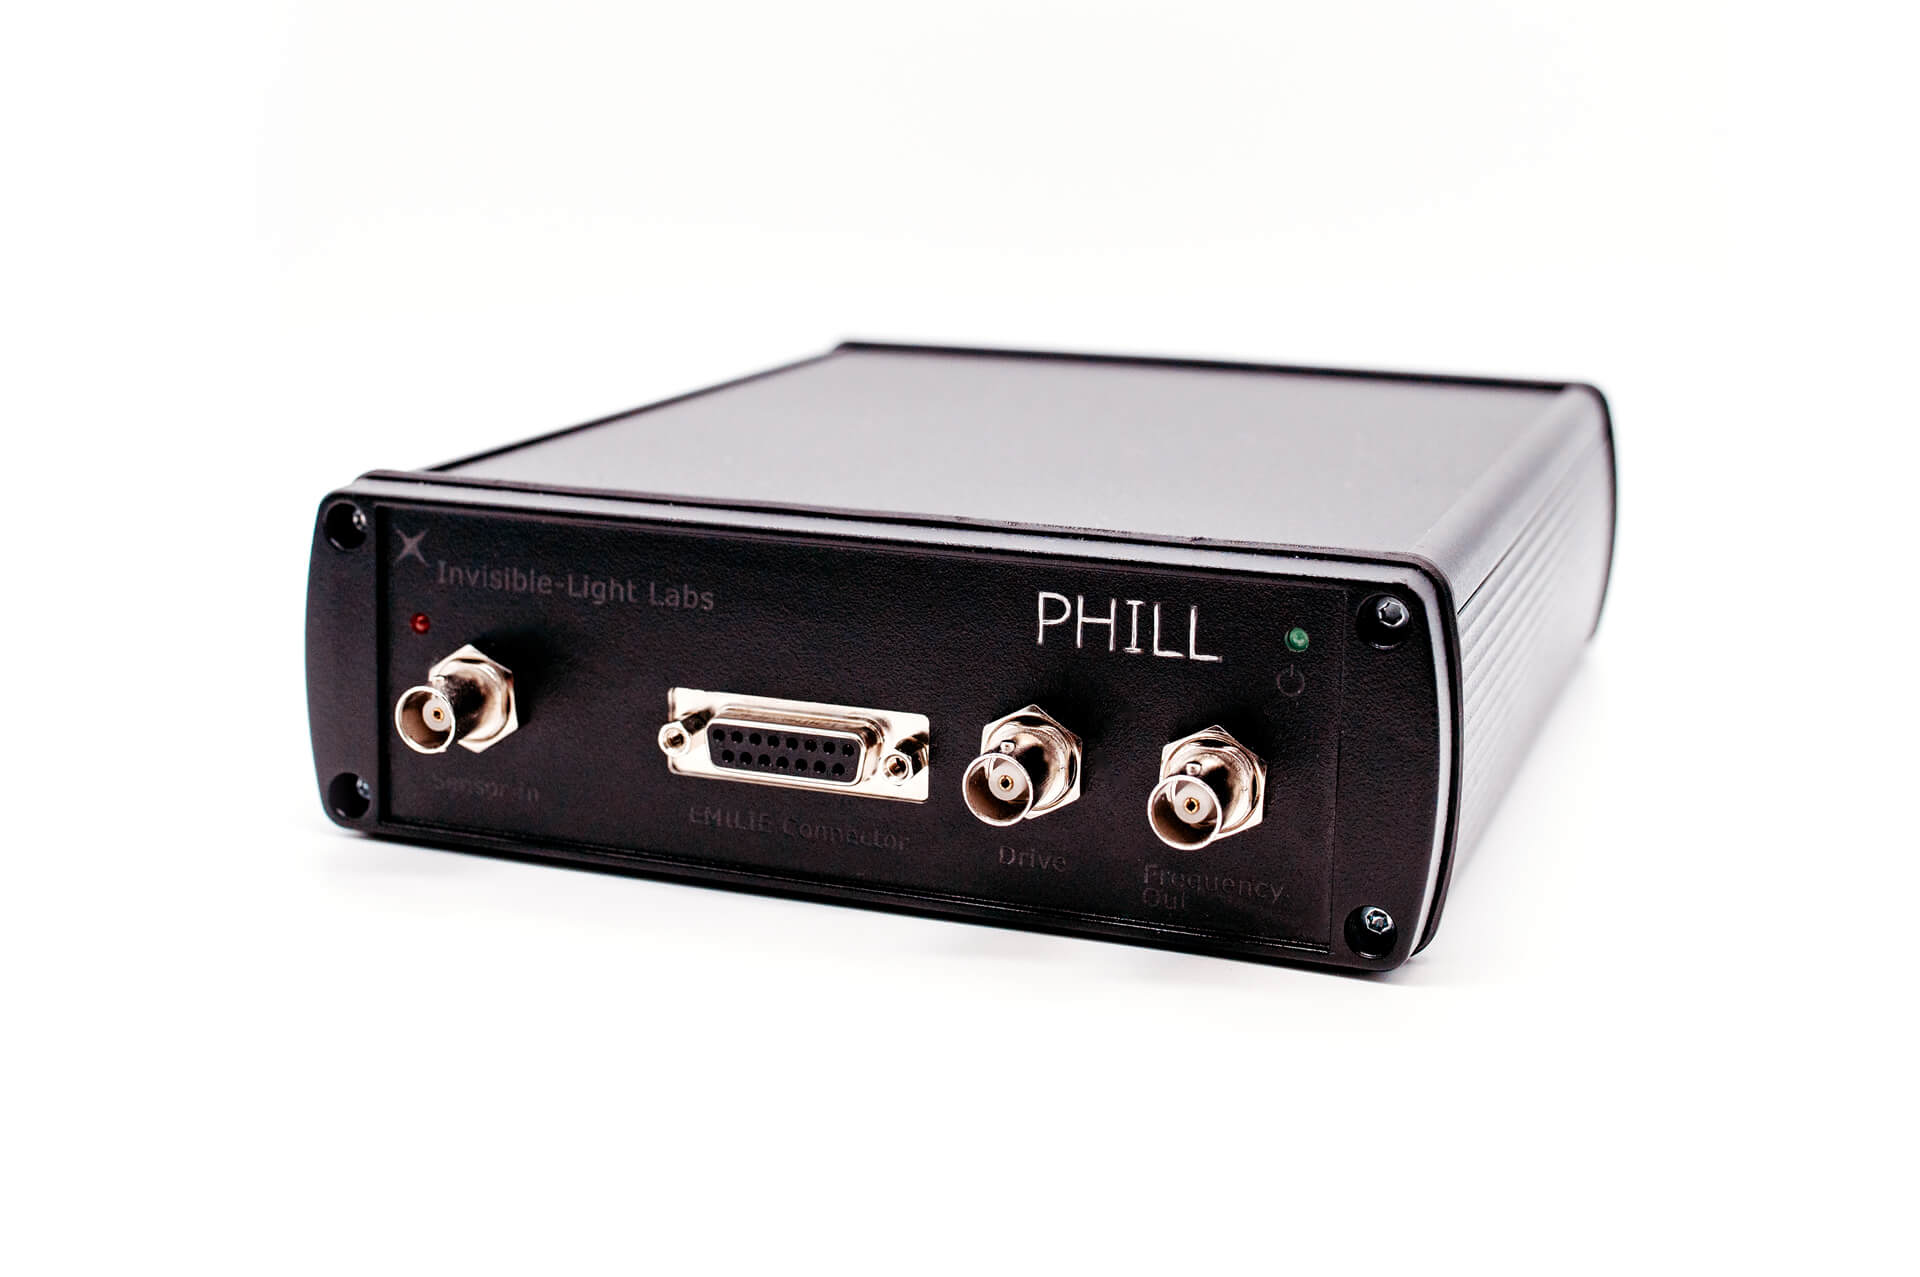 PHILL allows you to actuate and track the frequency of your NEMS and MEMS resonators without losing the lock or having to set PID parameters making the system robust and easy to use. The pre-amplifier is integrated and the system allows for resonance mode selection.